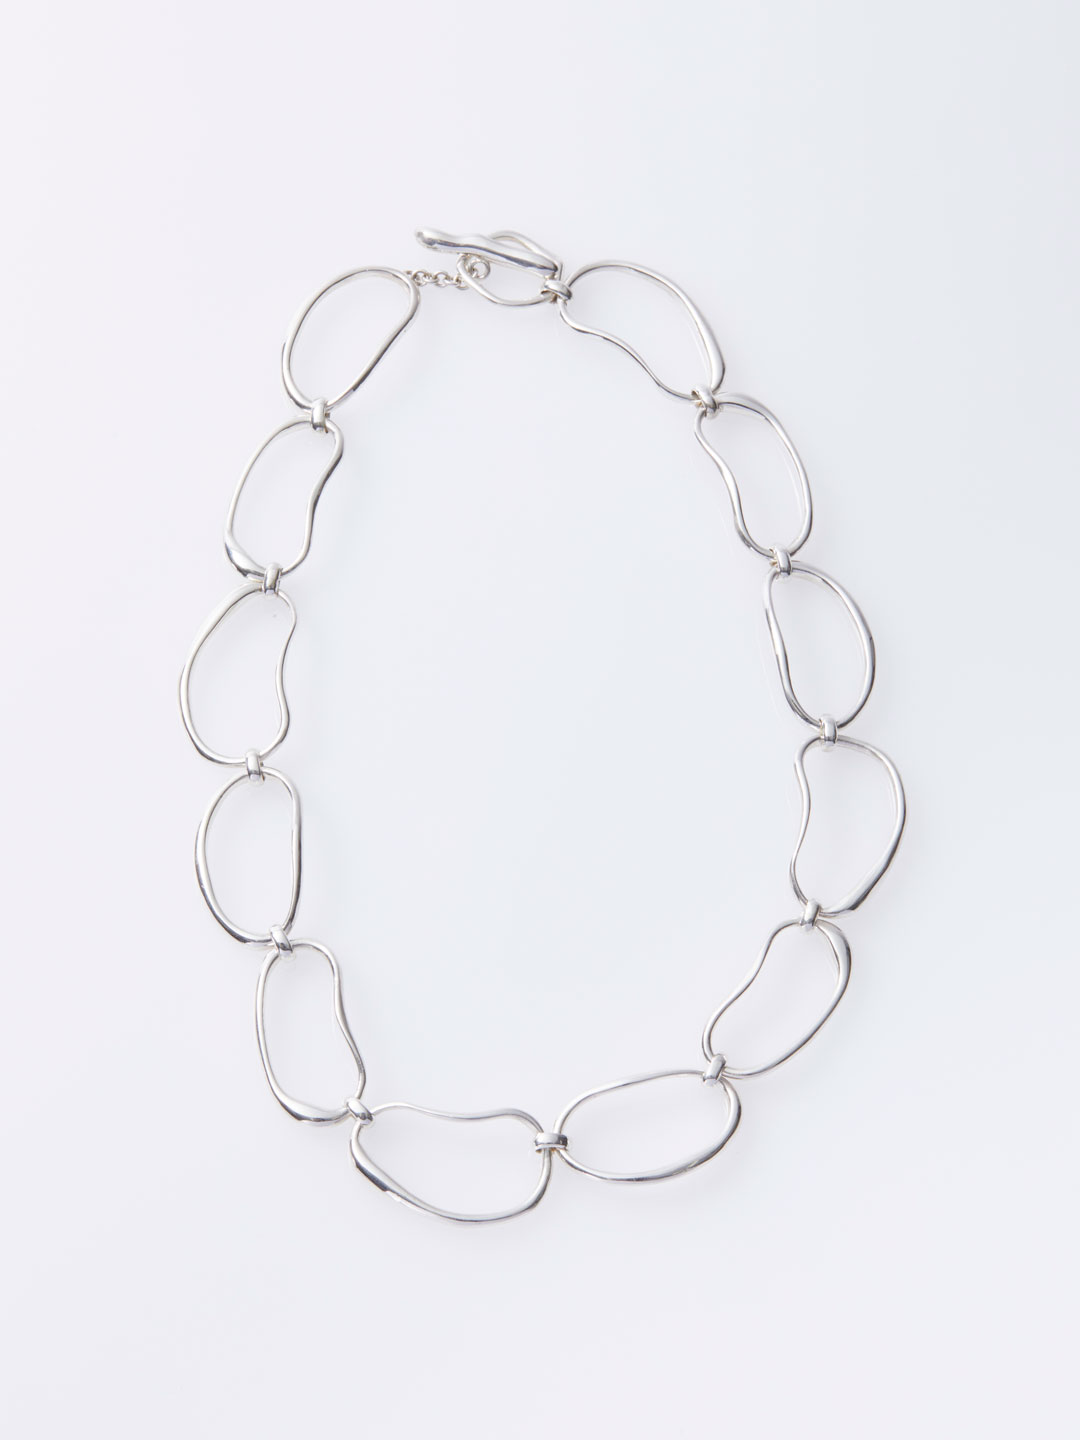 Handformed Oval Link Chain Neklace - Silver